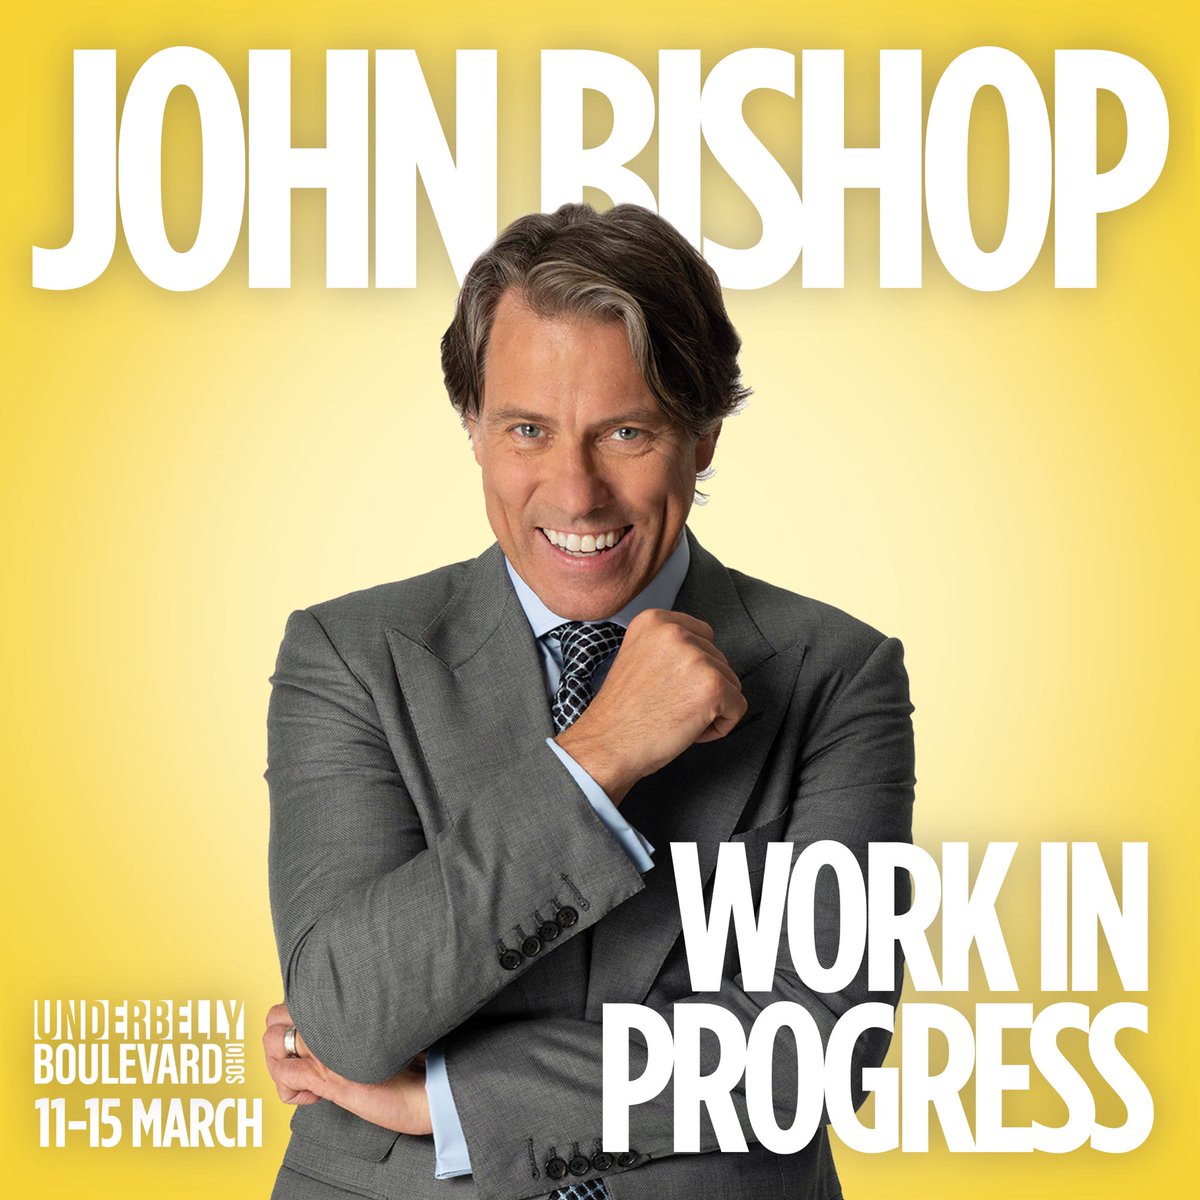 Join me for a five-night residency in the heart of Soho at the brilliant Underbelly Boulevard, where I’ll be diving into some exciting new #WorkInProgress……. Tickets on sale today at 10am GMT! Visit johnbishoponline.com or click the link below to grab your tickets:…